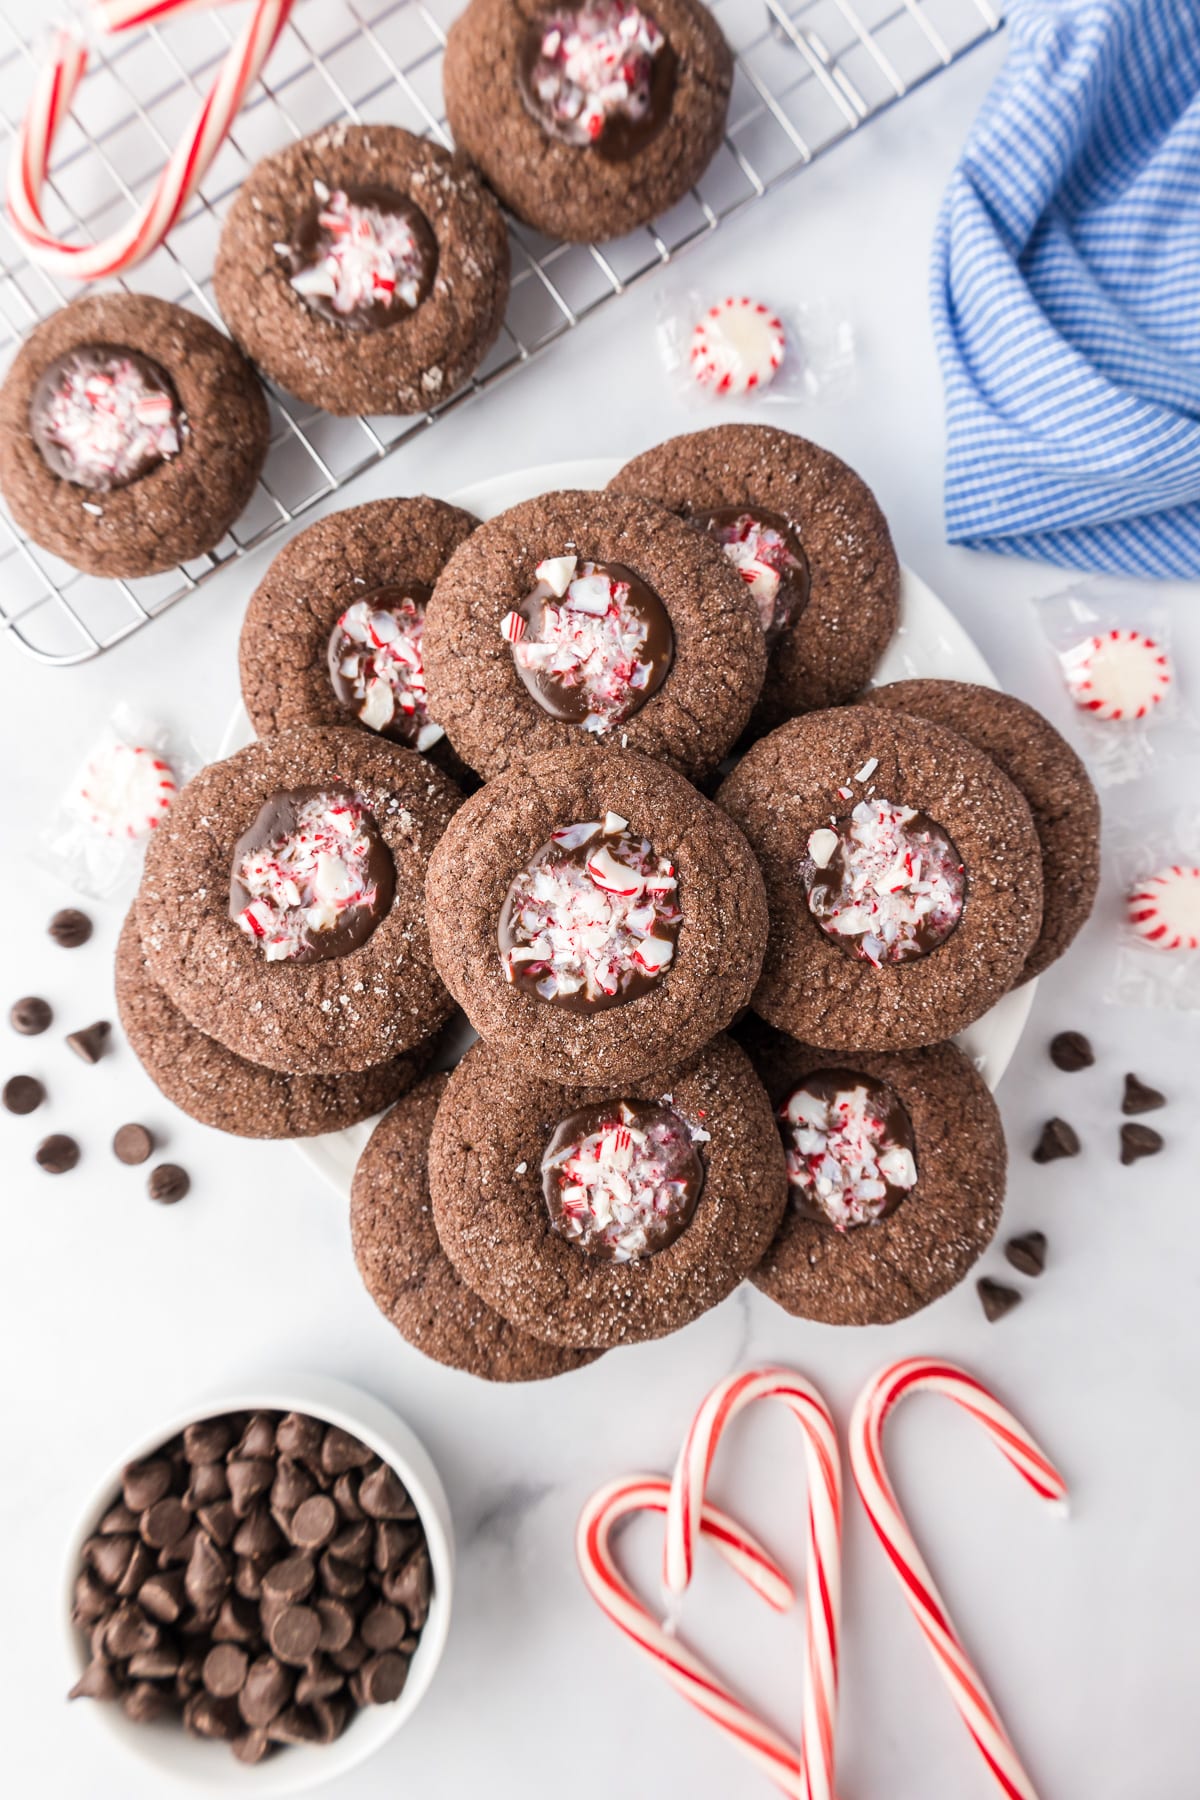 Chocolate peppermint cookies on a white plate with candy canes, other peppermint and chocolate chips nearby on the table.